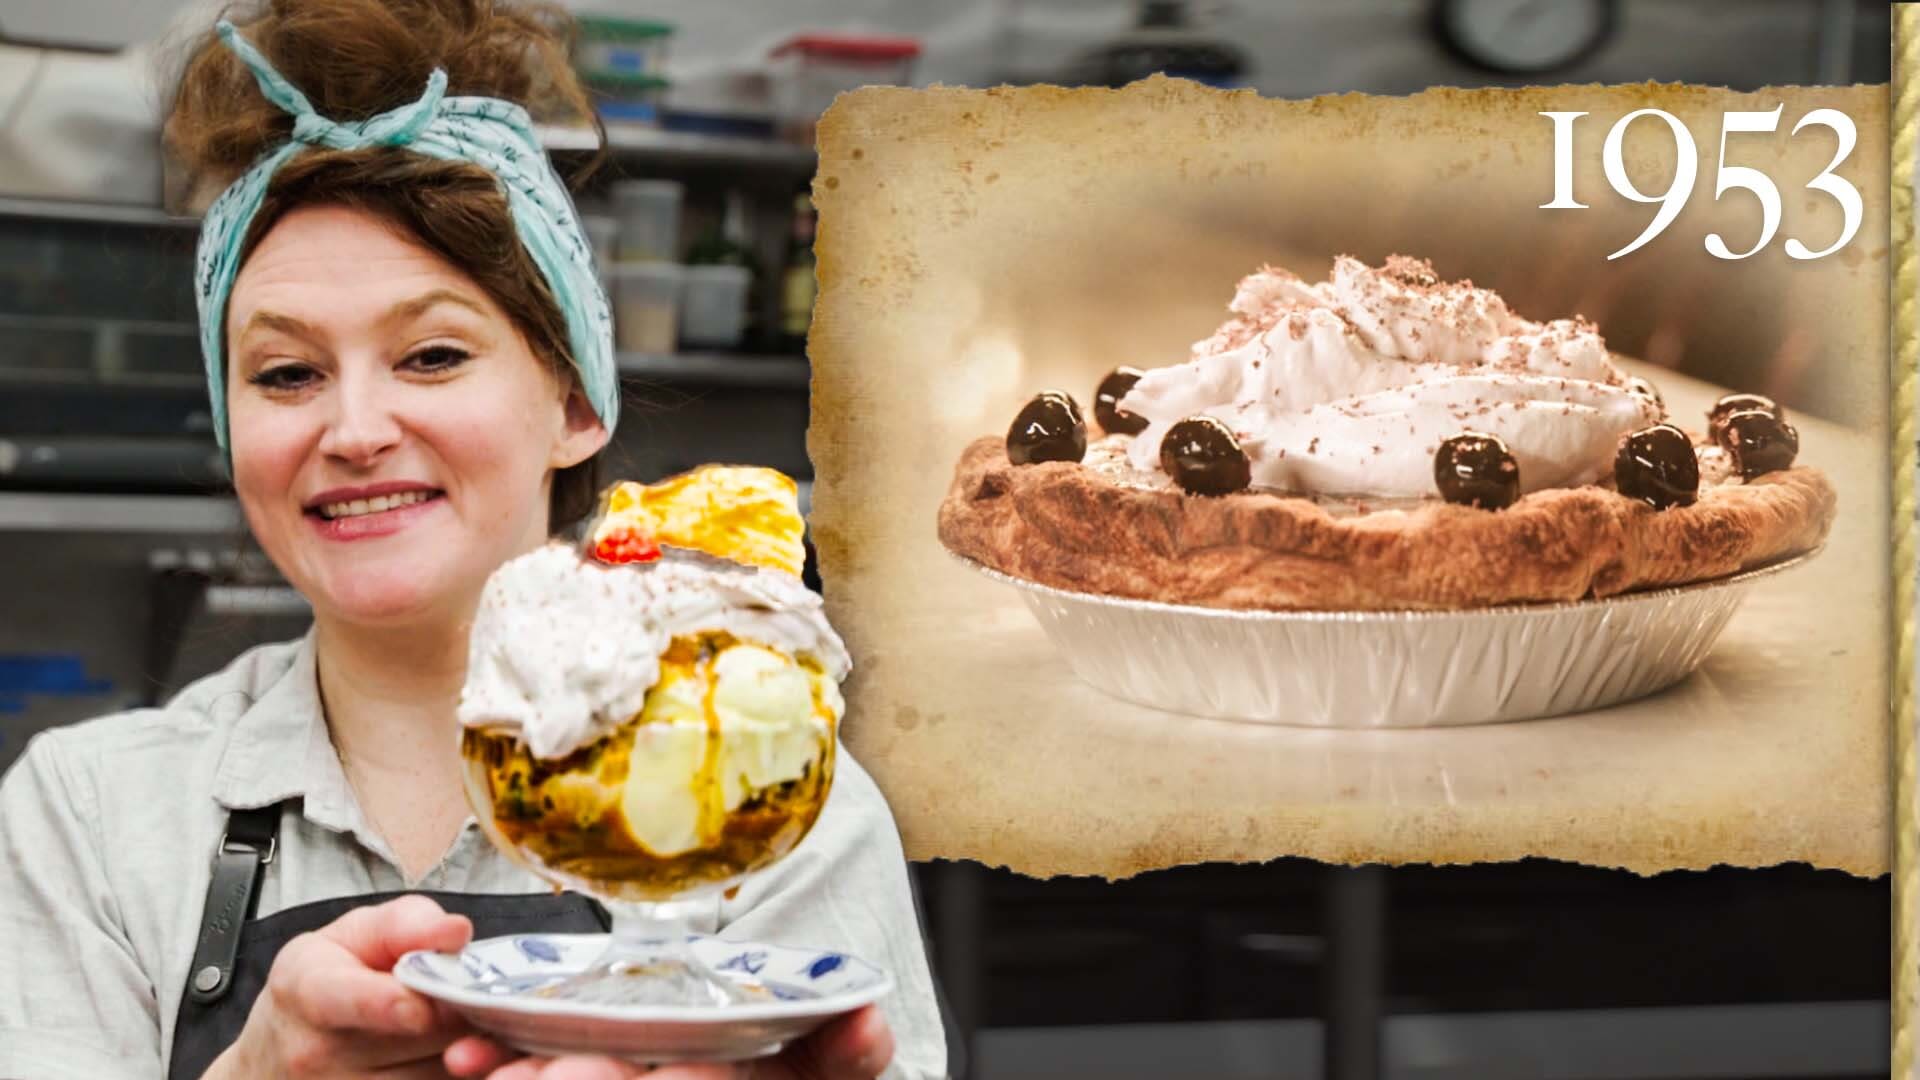 Watch Designing a New Dessert from a Forgotten 70-Year-Old Pie Recipe